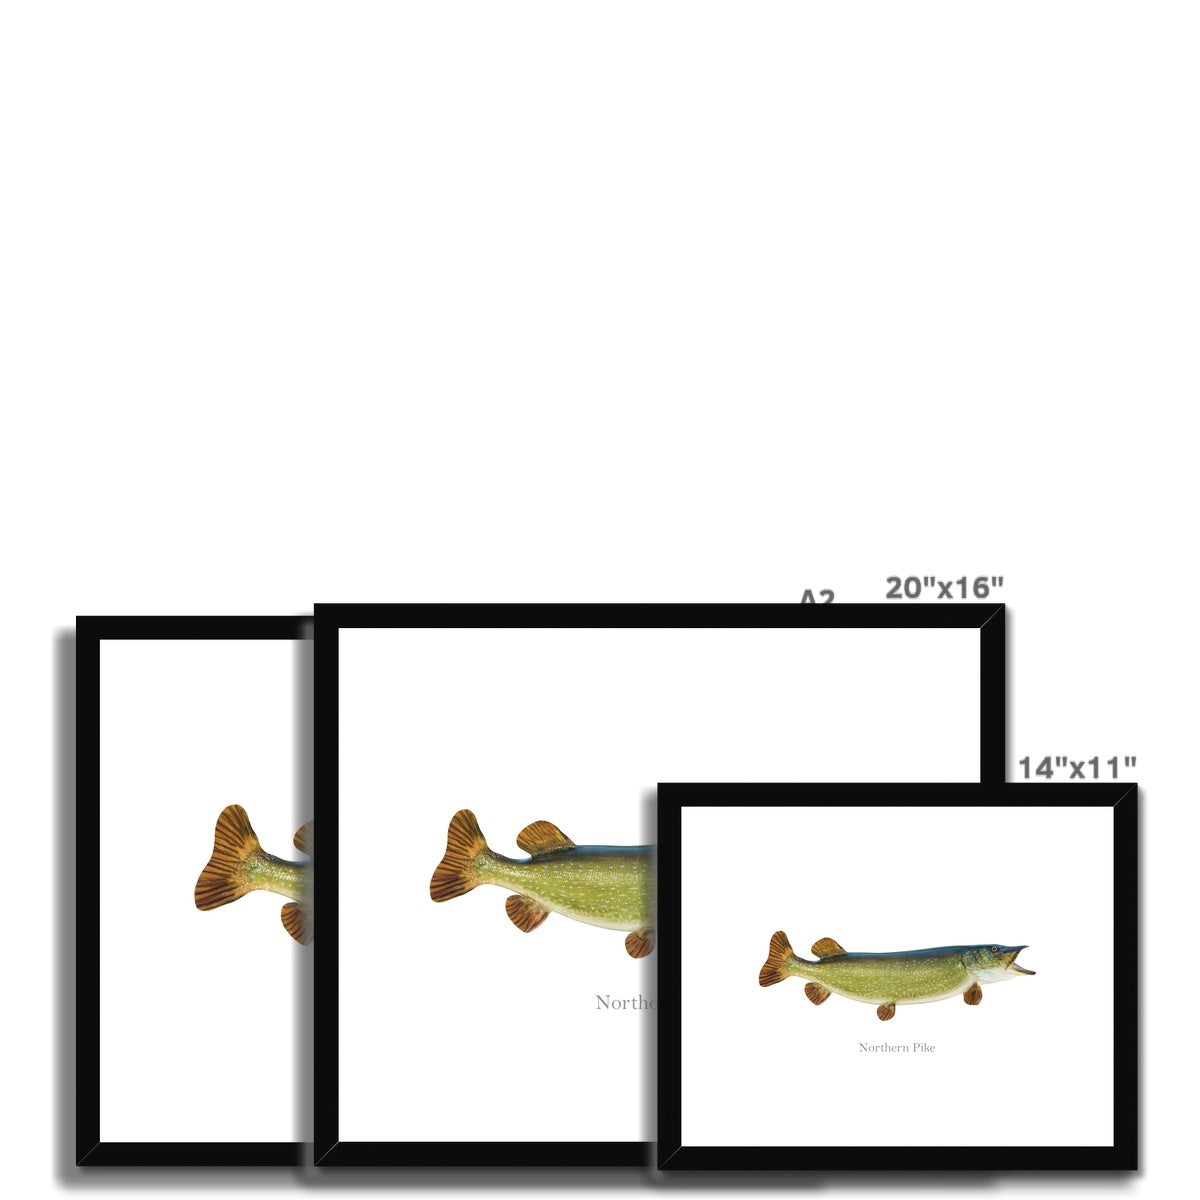 Northern Pike - Framed & Mounted Print